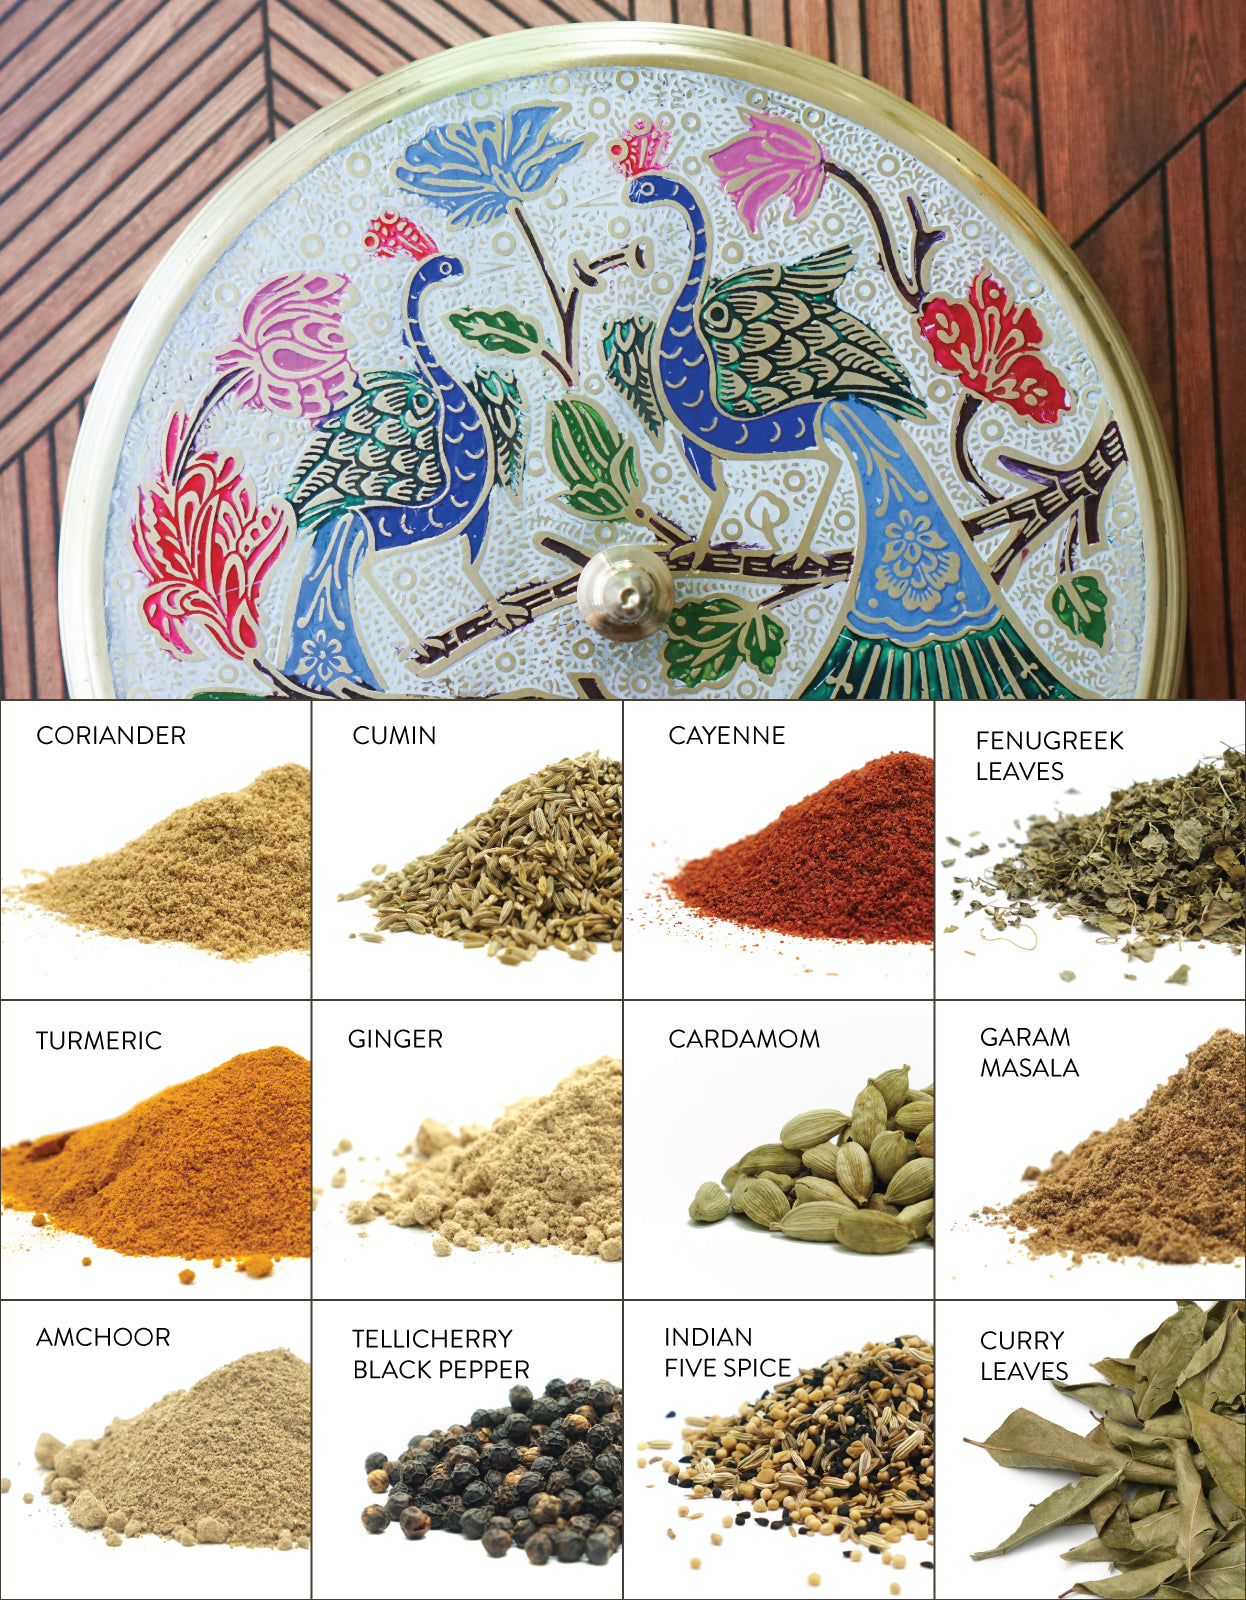 Sacred Peacock Indian Spice Box and 12 spice Indian Spice Set made up of all organic spices. 